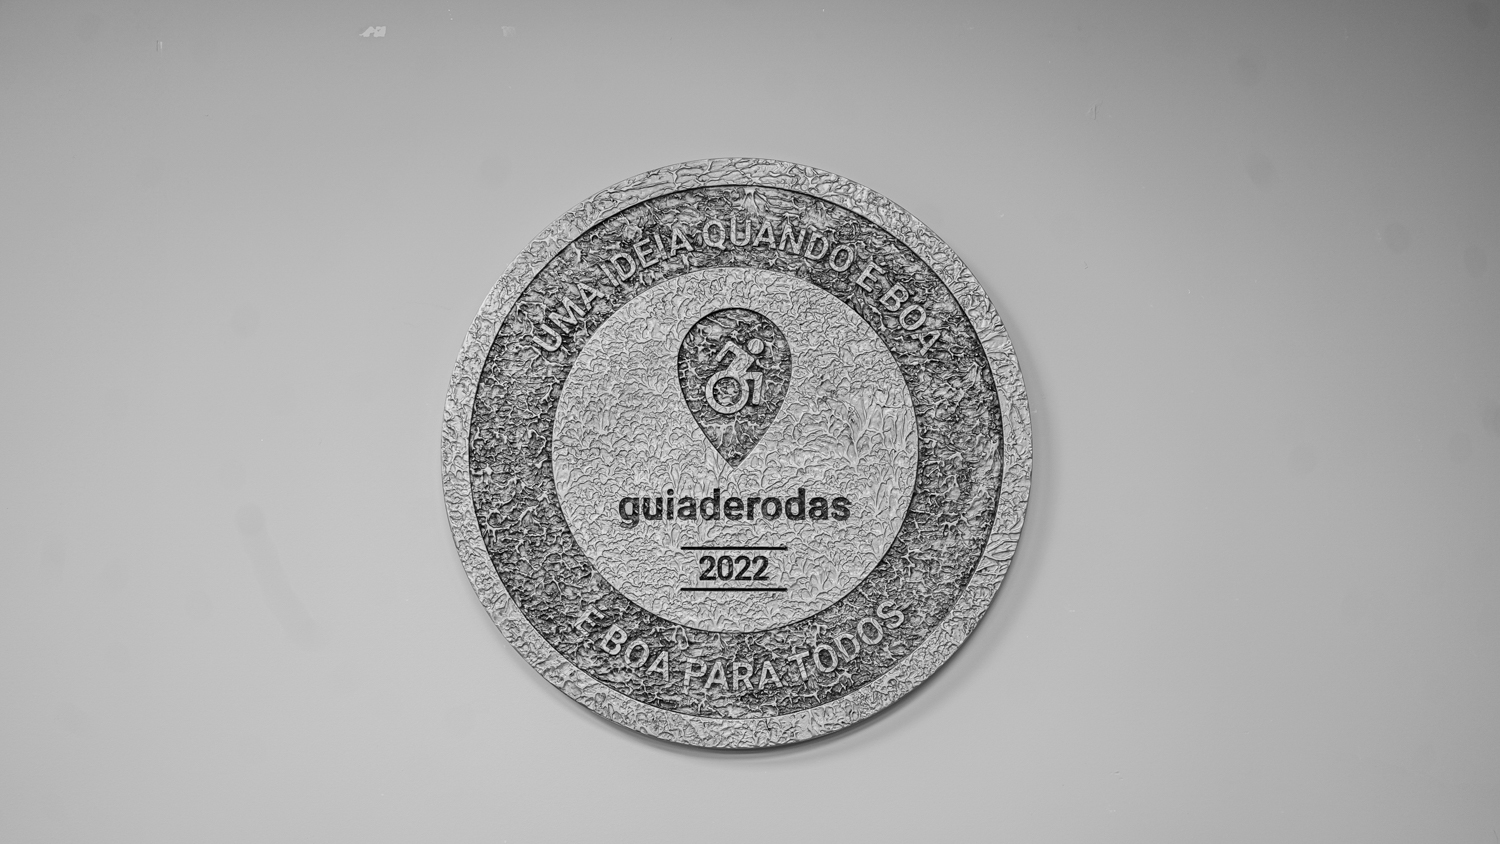 Guiaderodas, the certification for accessibility and inclusion ￼